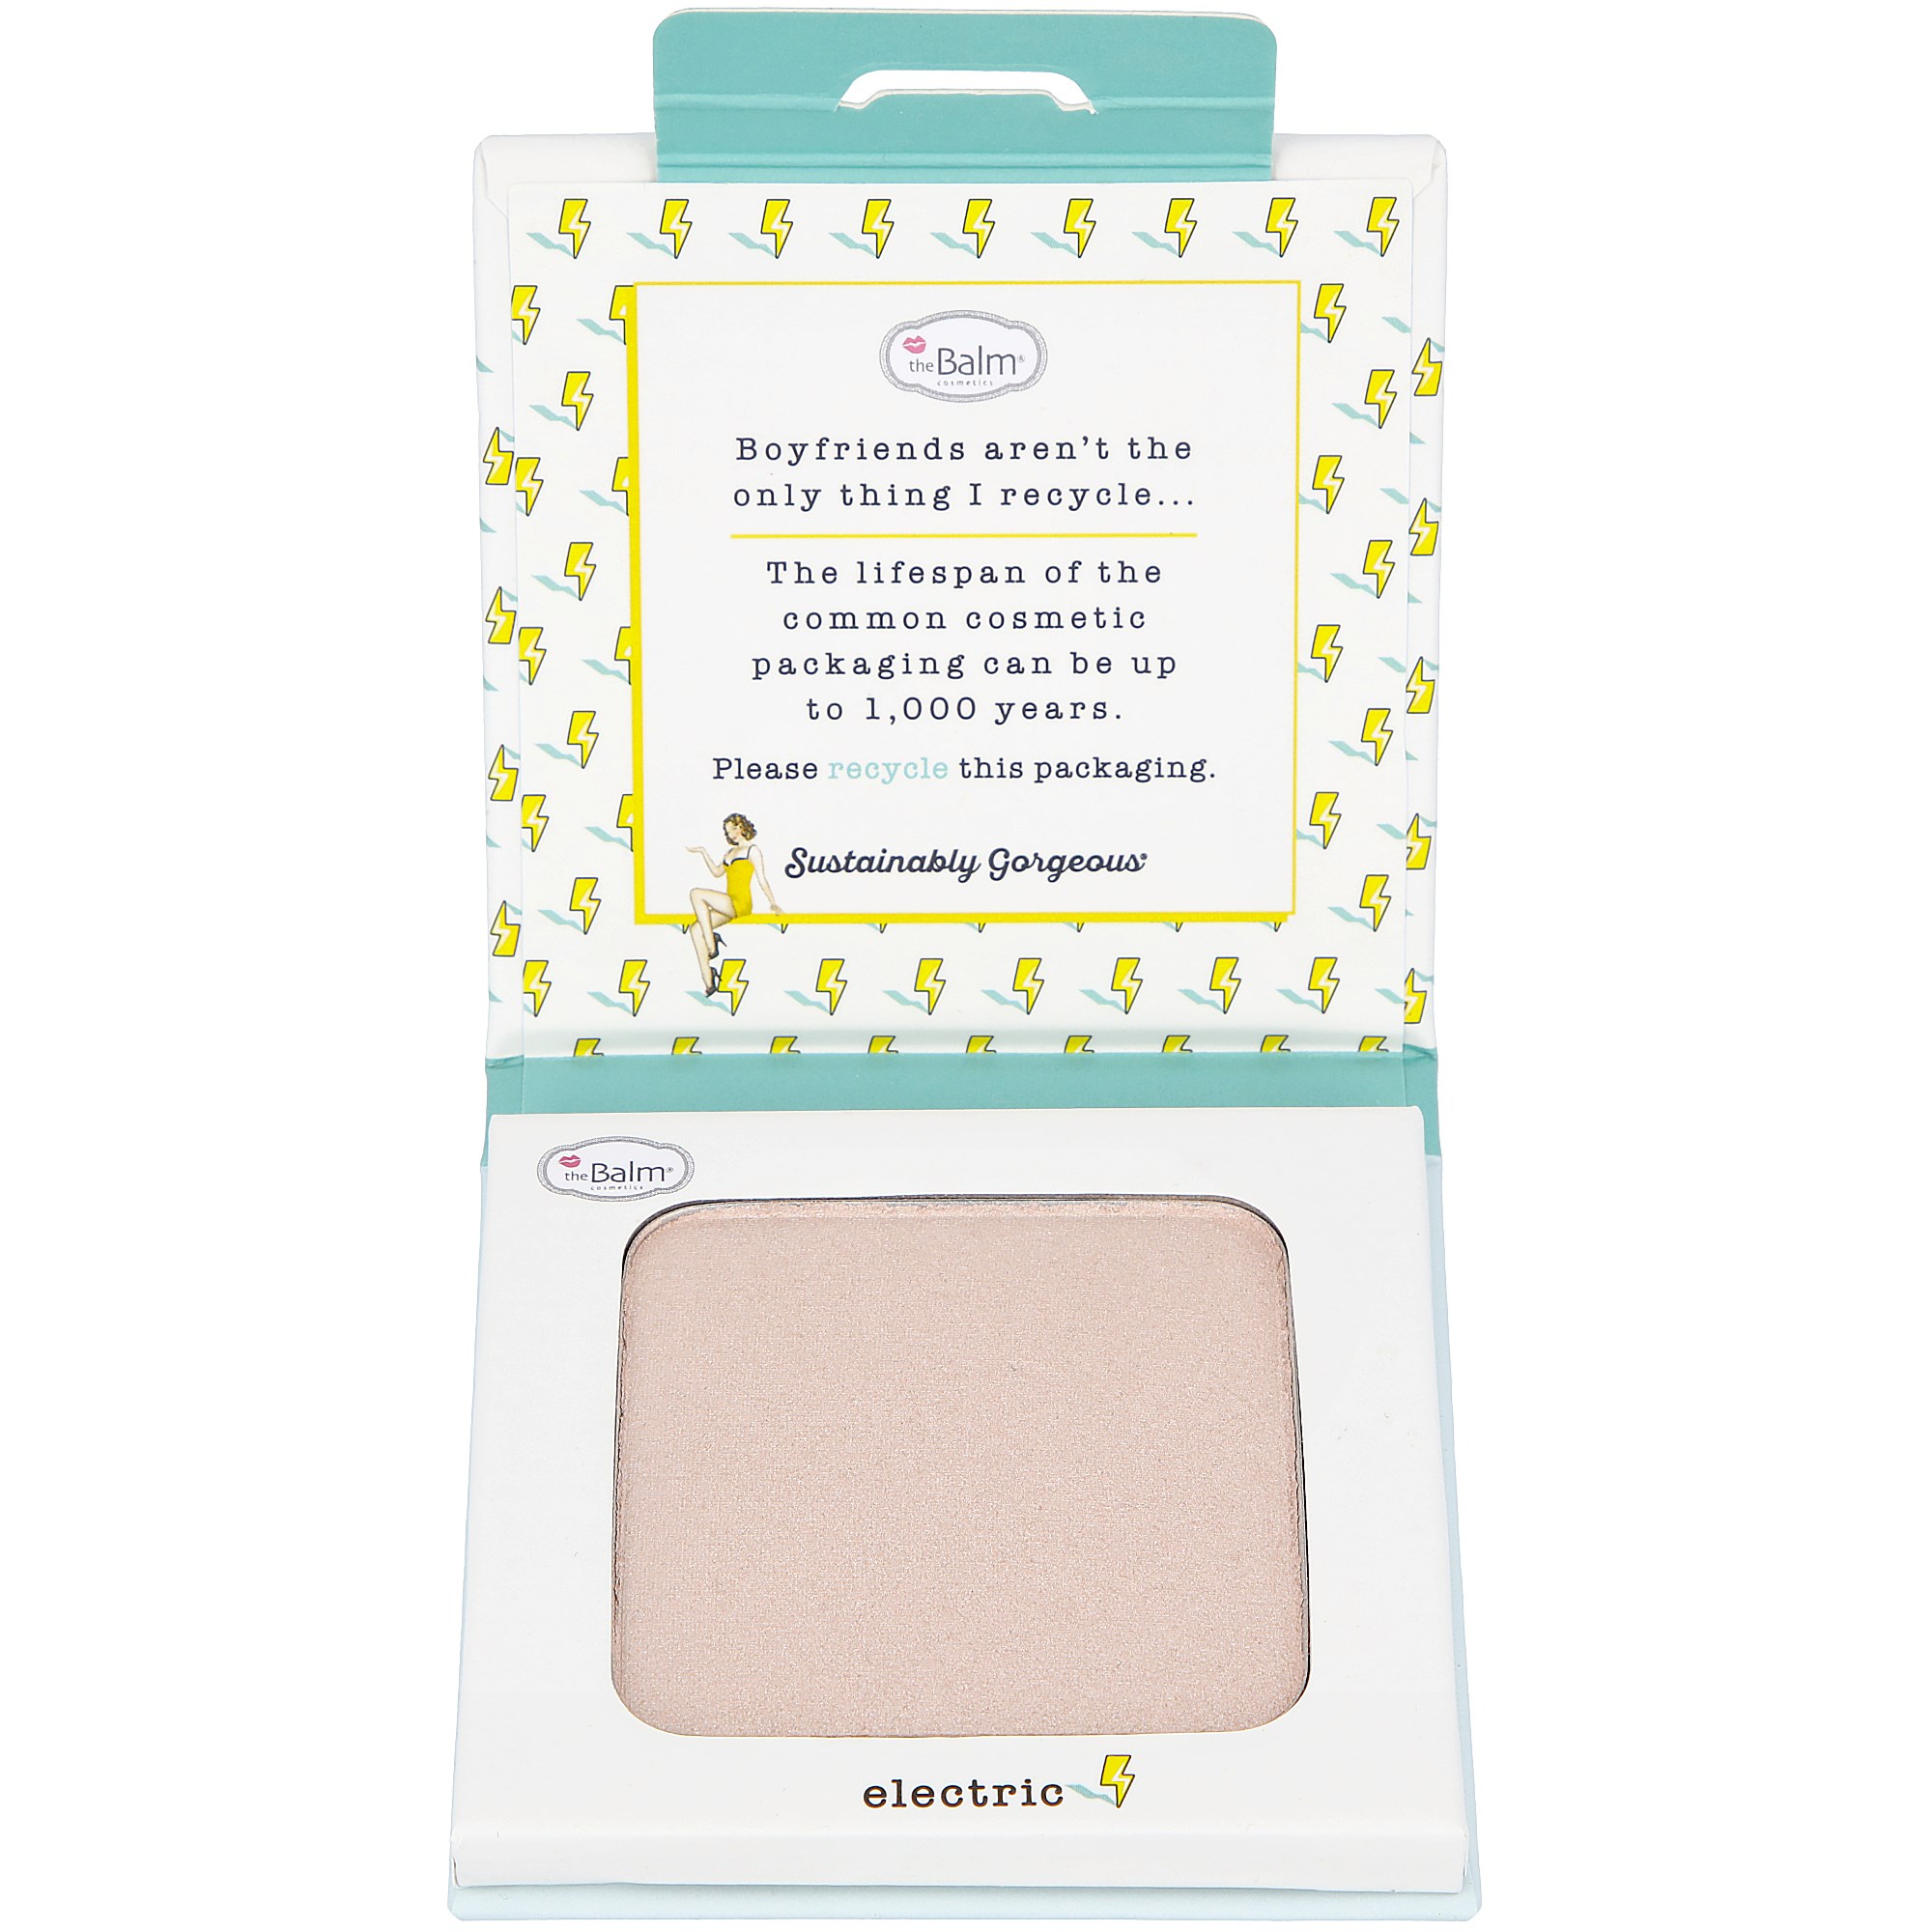 theBalm Cosmetics the Balm Sustainably Gorgeous Highlighter Single Highlighter Elec